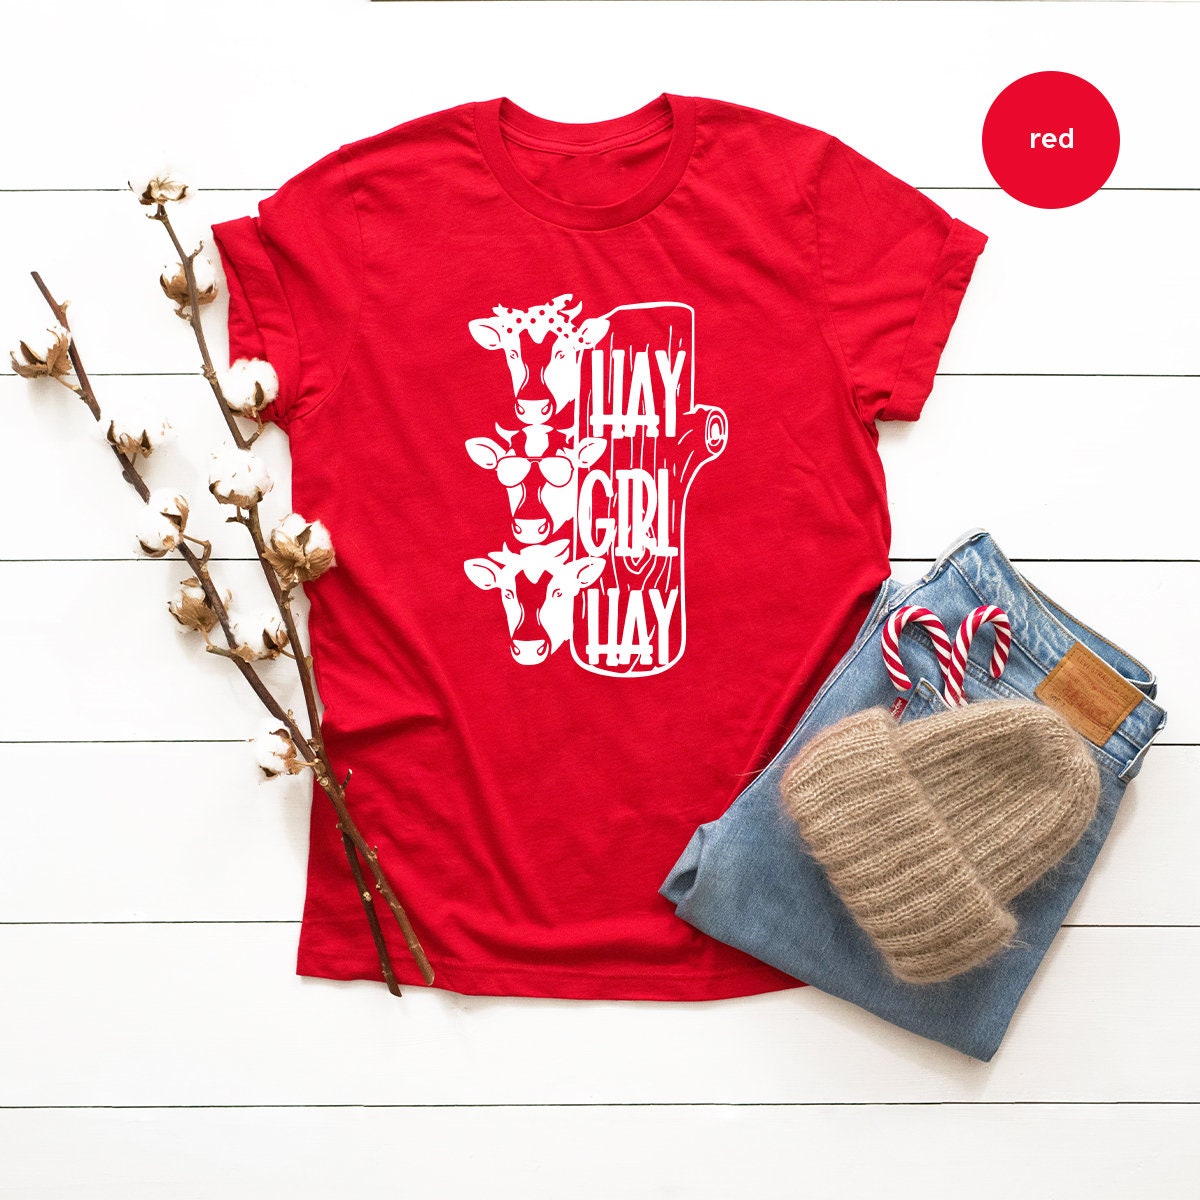 Funny Heifer T Shirt, Cow Bandana T Shirt, Hay Girl Hay Shirt, Farmer Girl Shirt, Crazy Cow T Shirt, Country Life Shirt, Gift For Wife - Fastdeliverytees.com